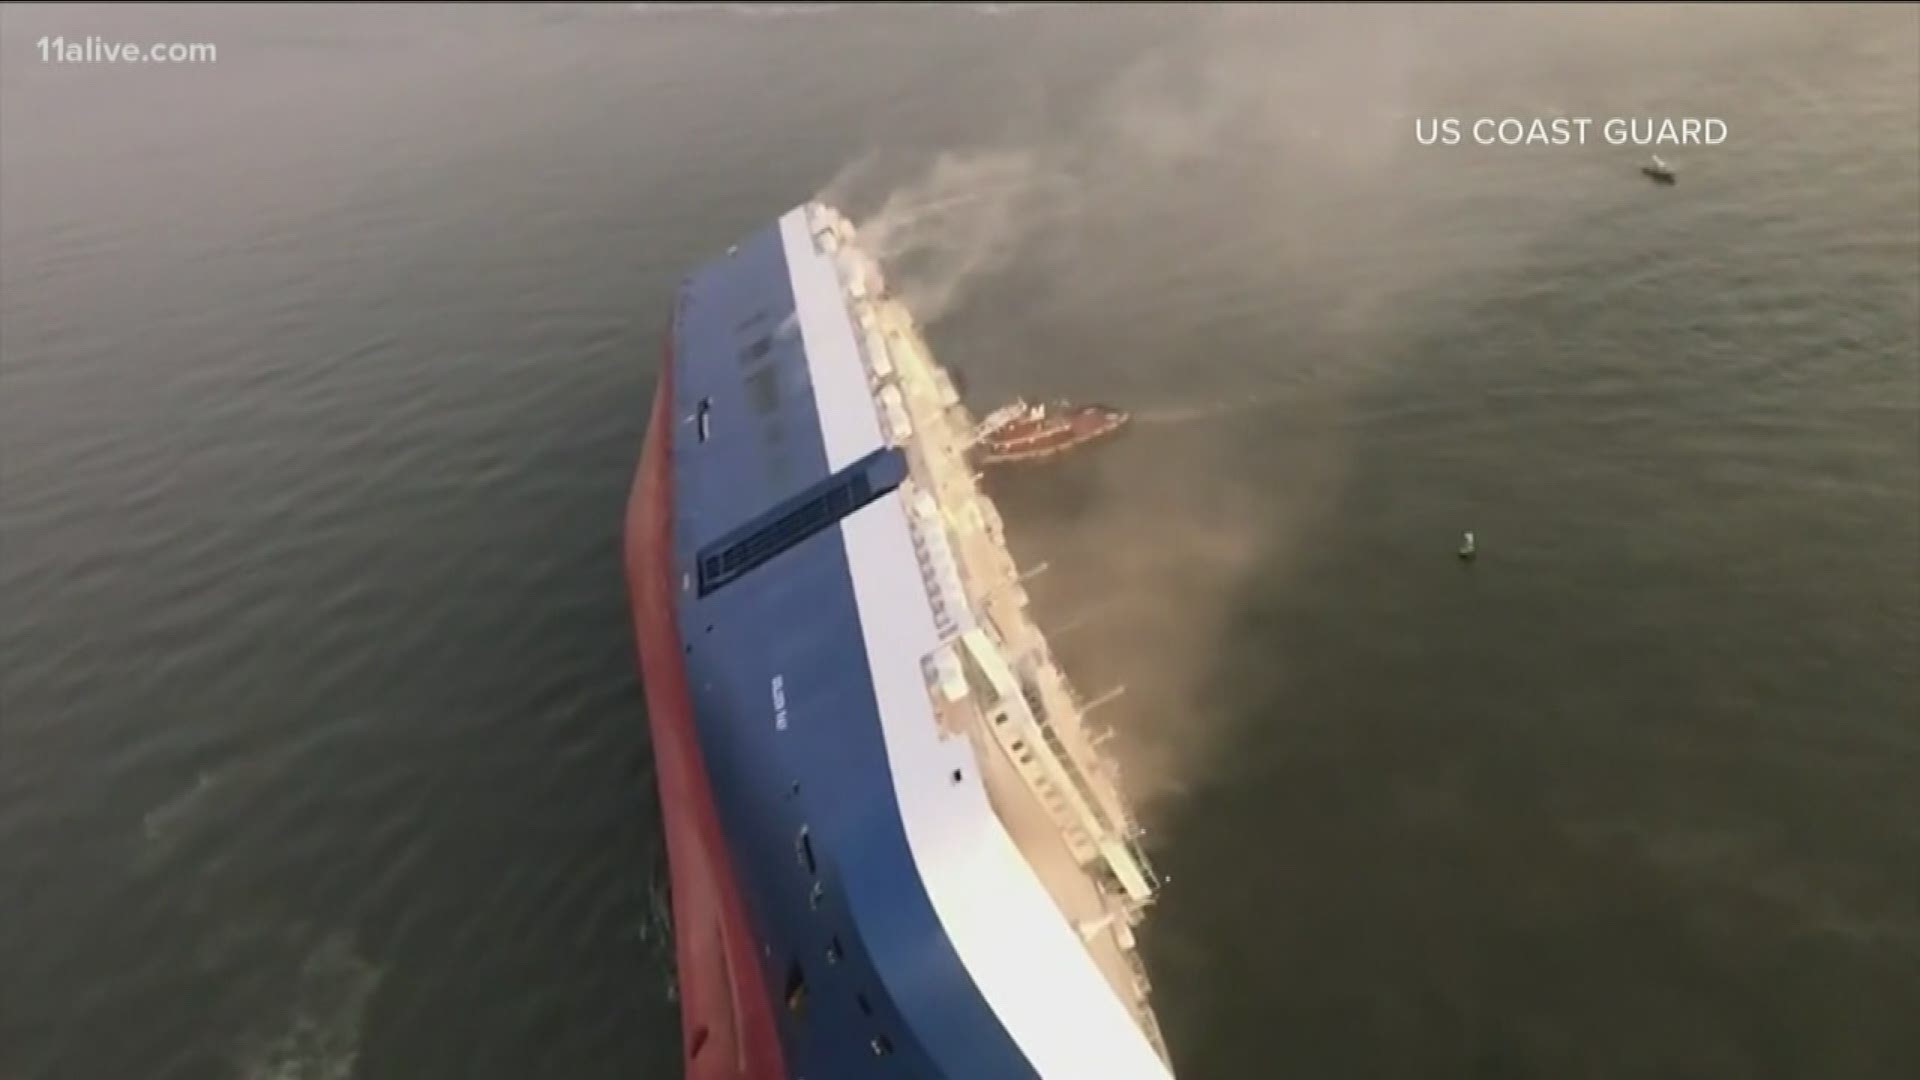 The ship capsized in the Brunswick shipping channel earlier this month.